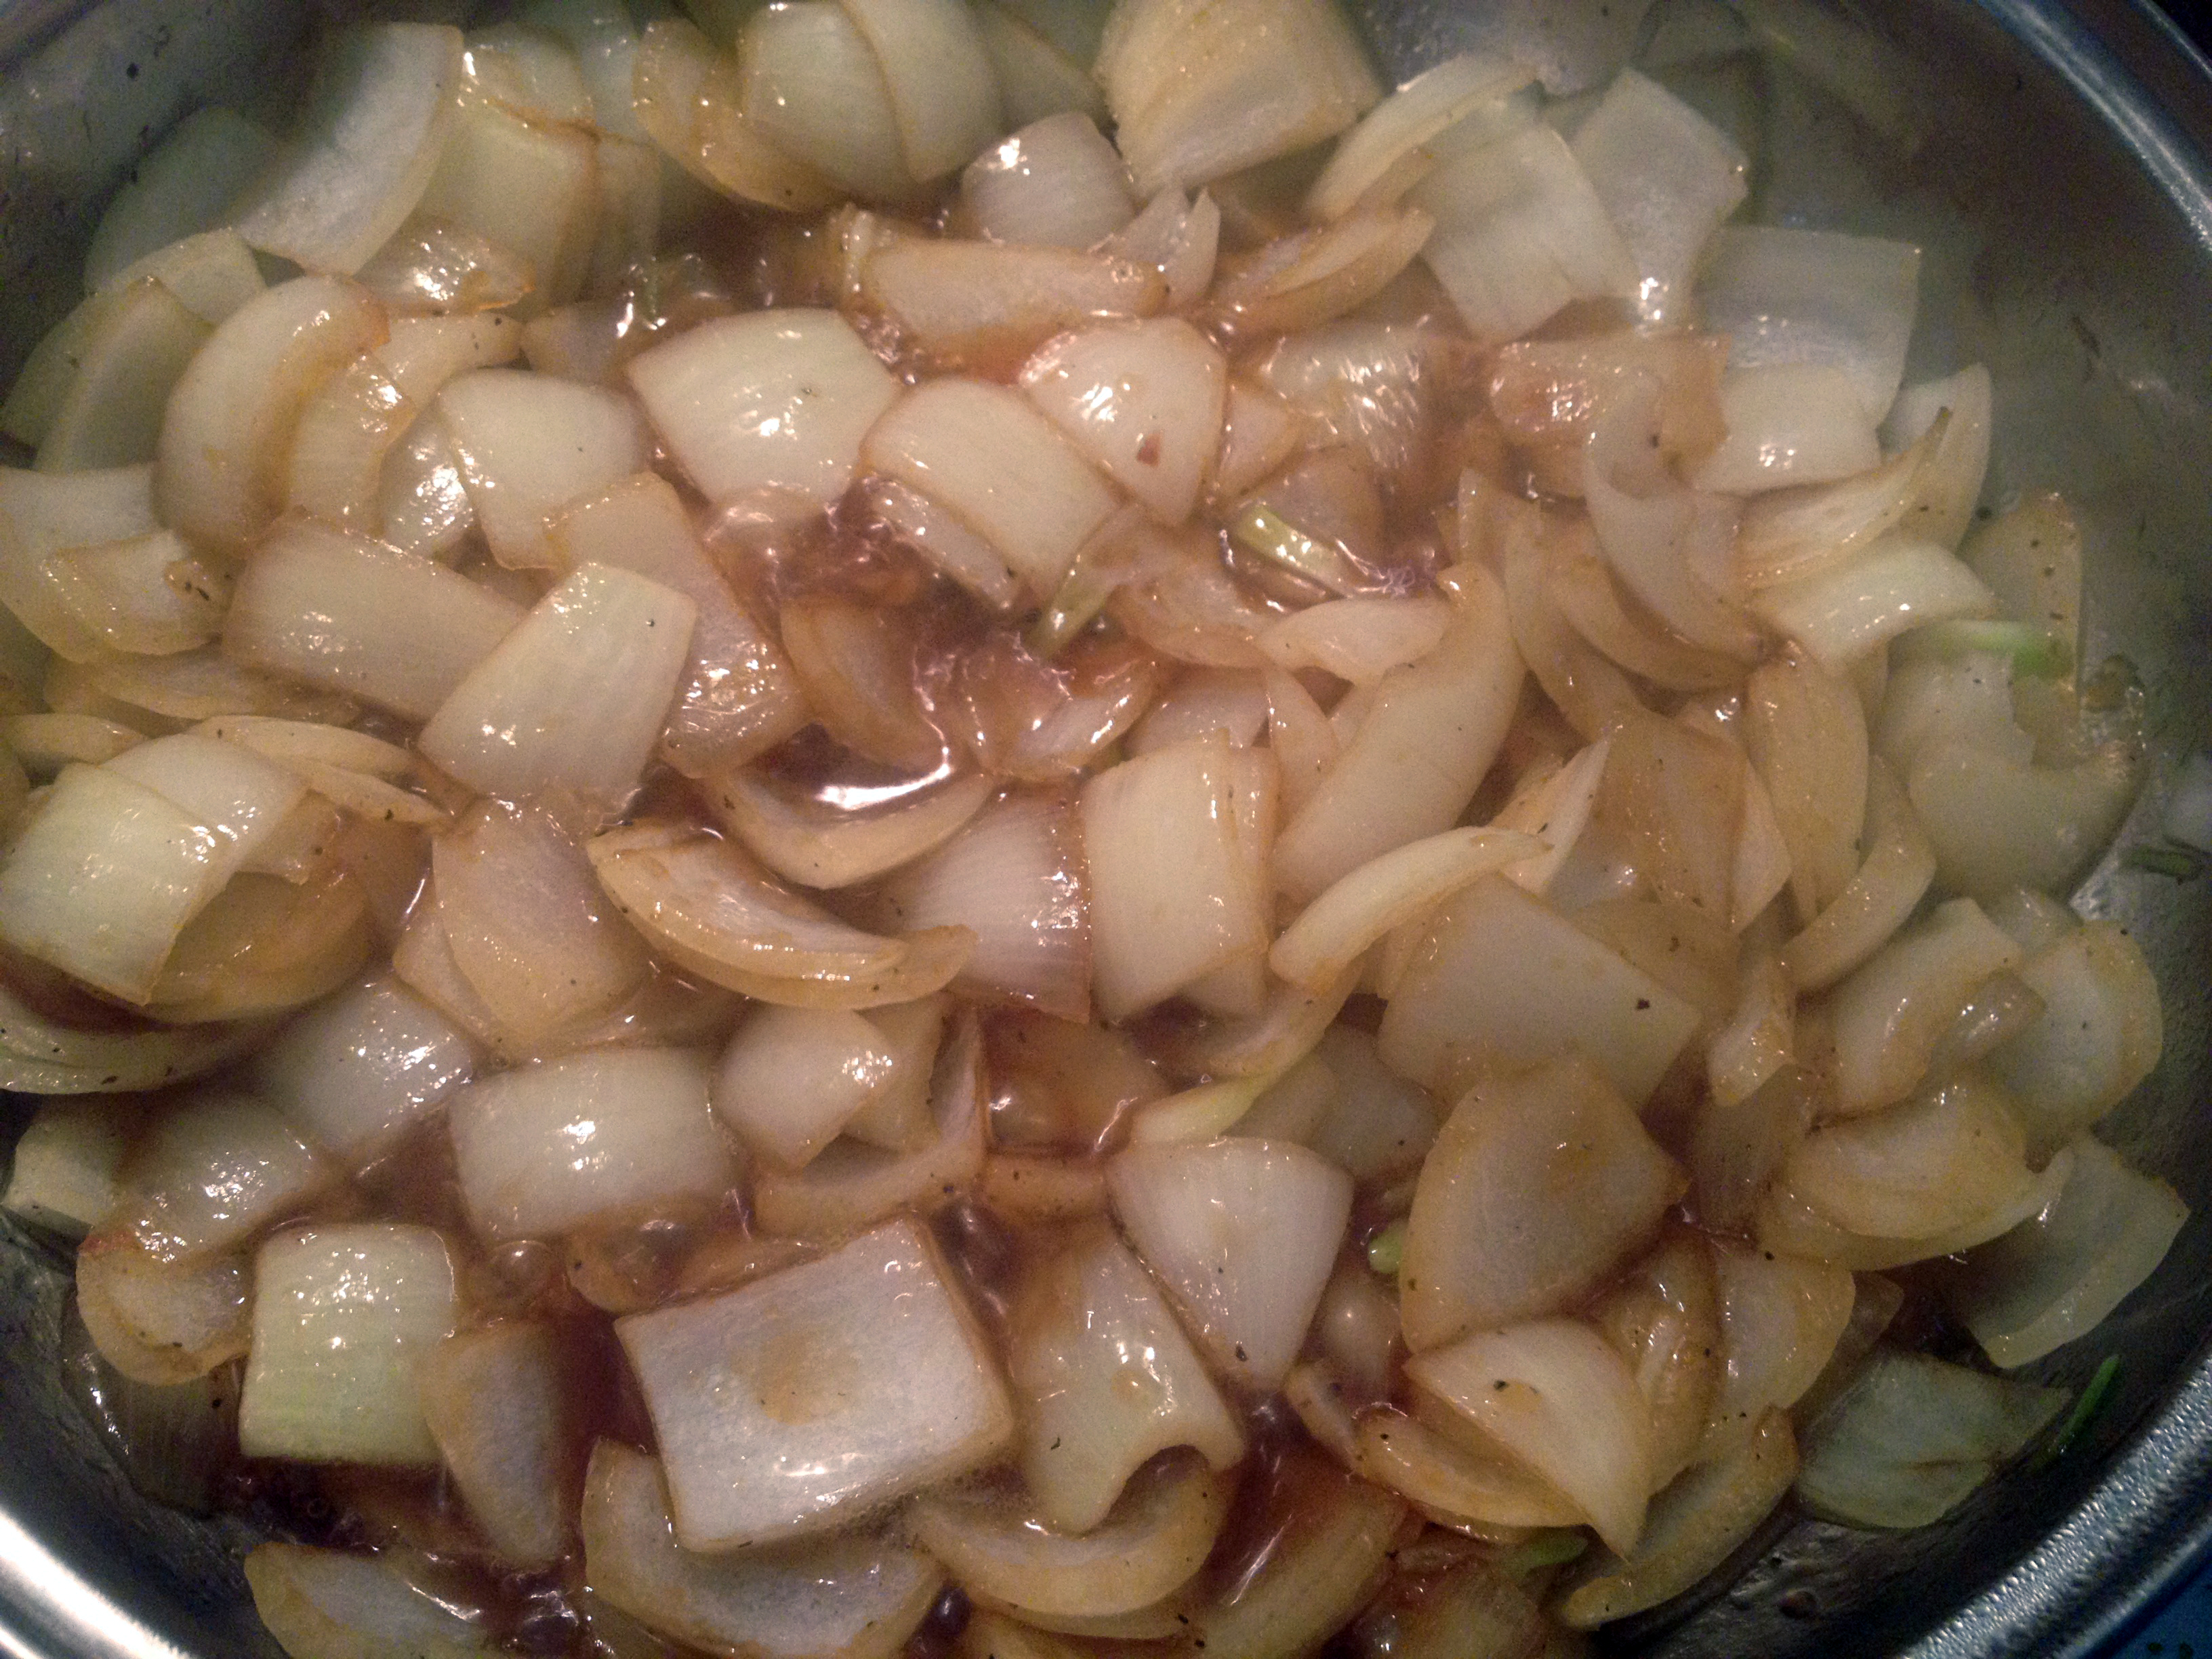 Is there anything better than onions?